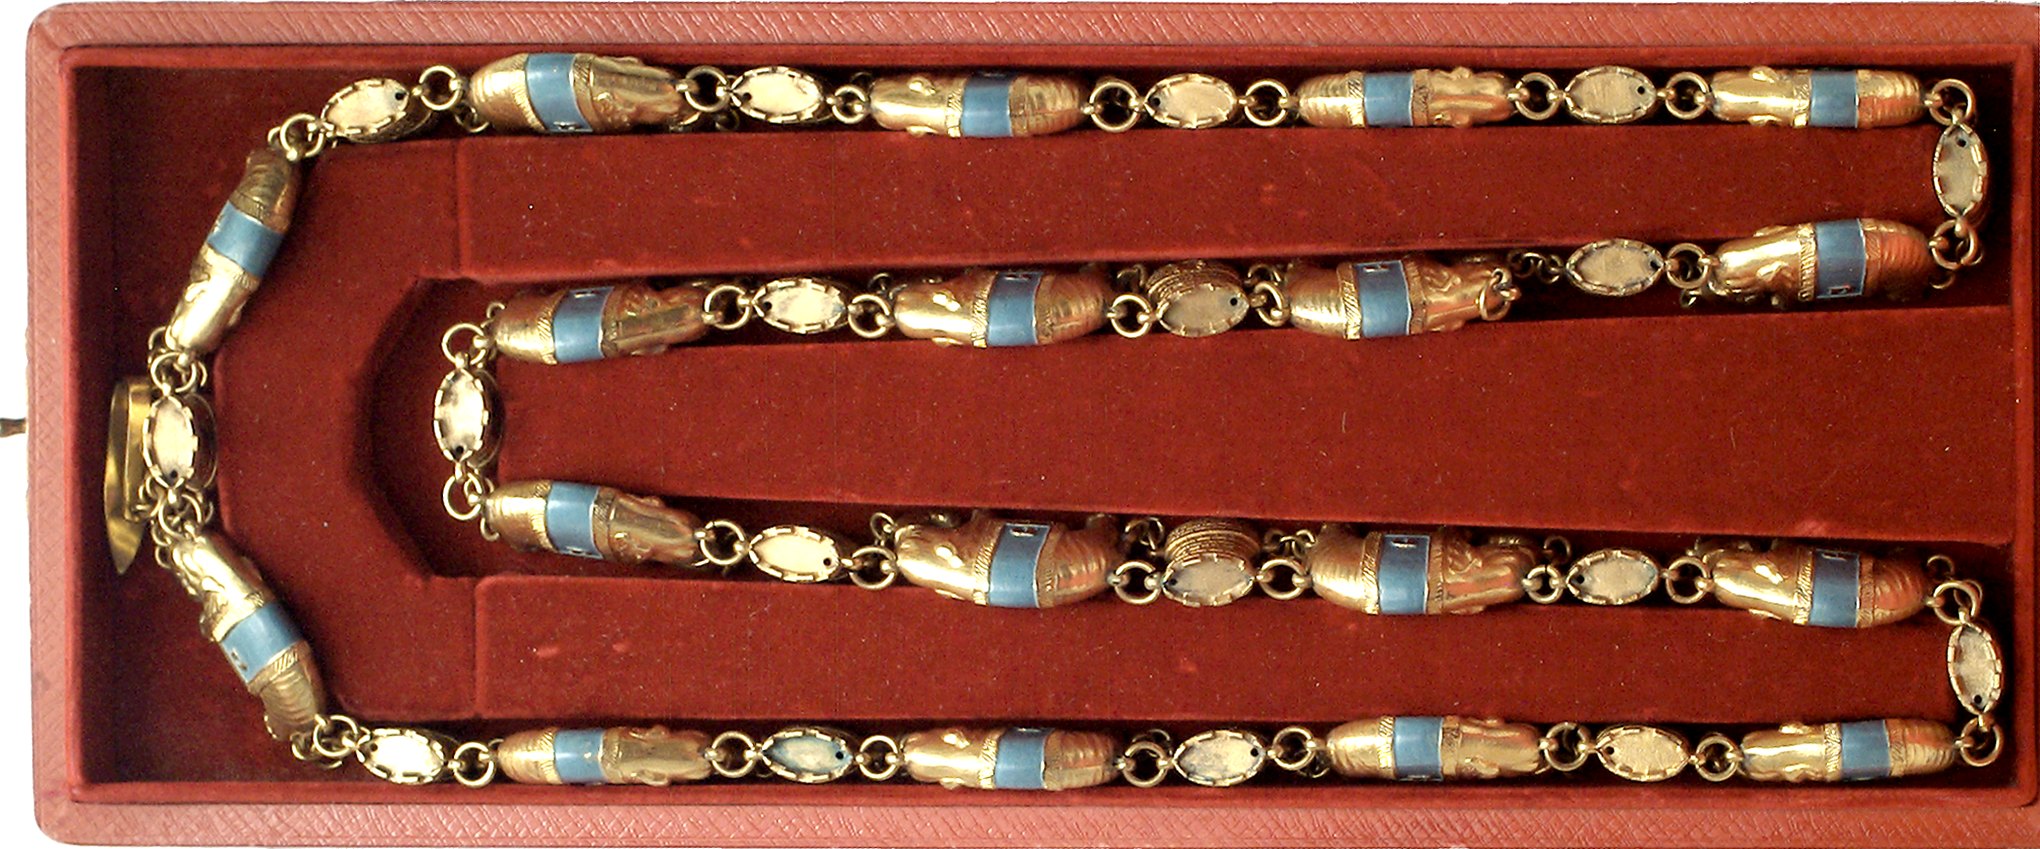 Collar of the Order of the Elephant  made by A.Michelsen.jpg